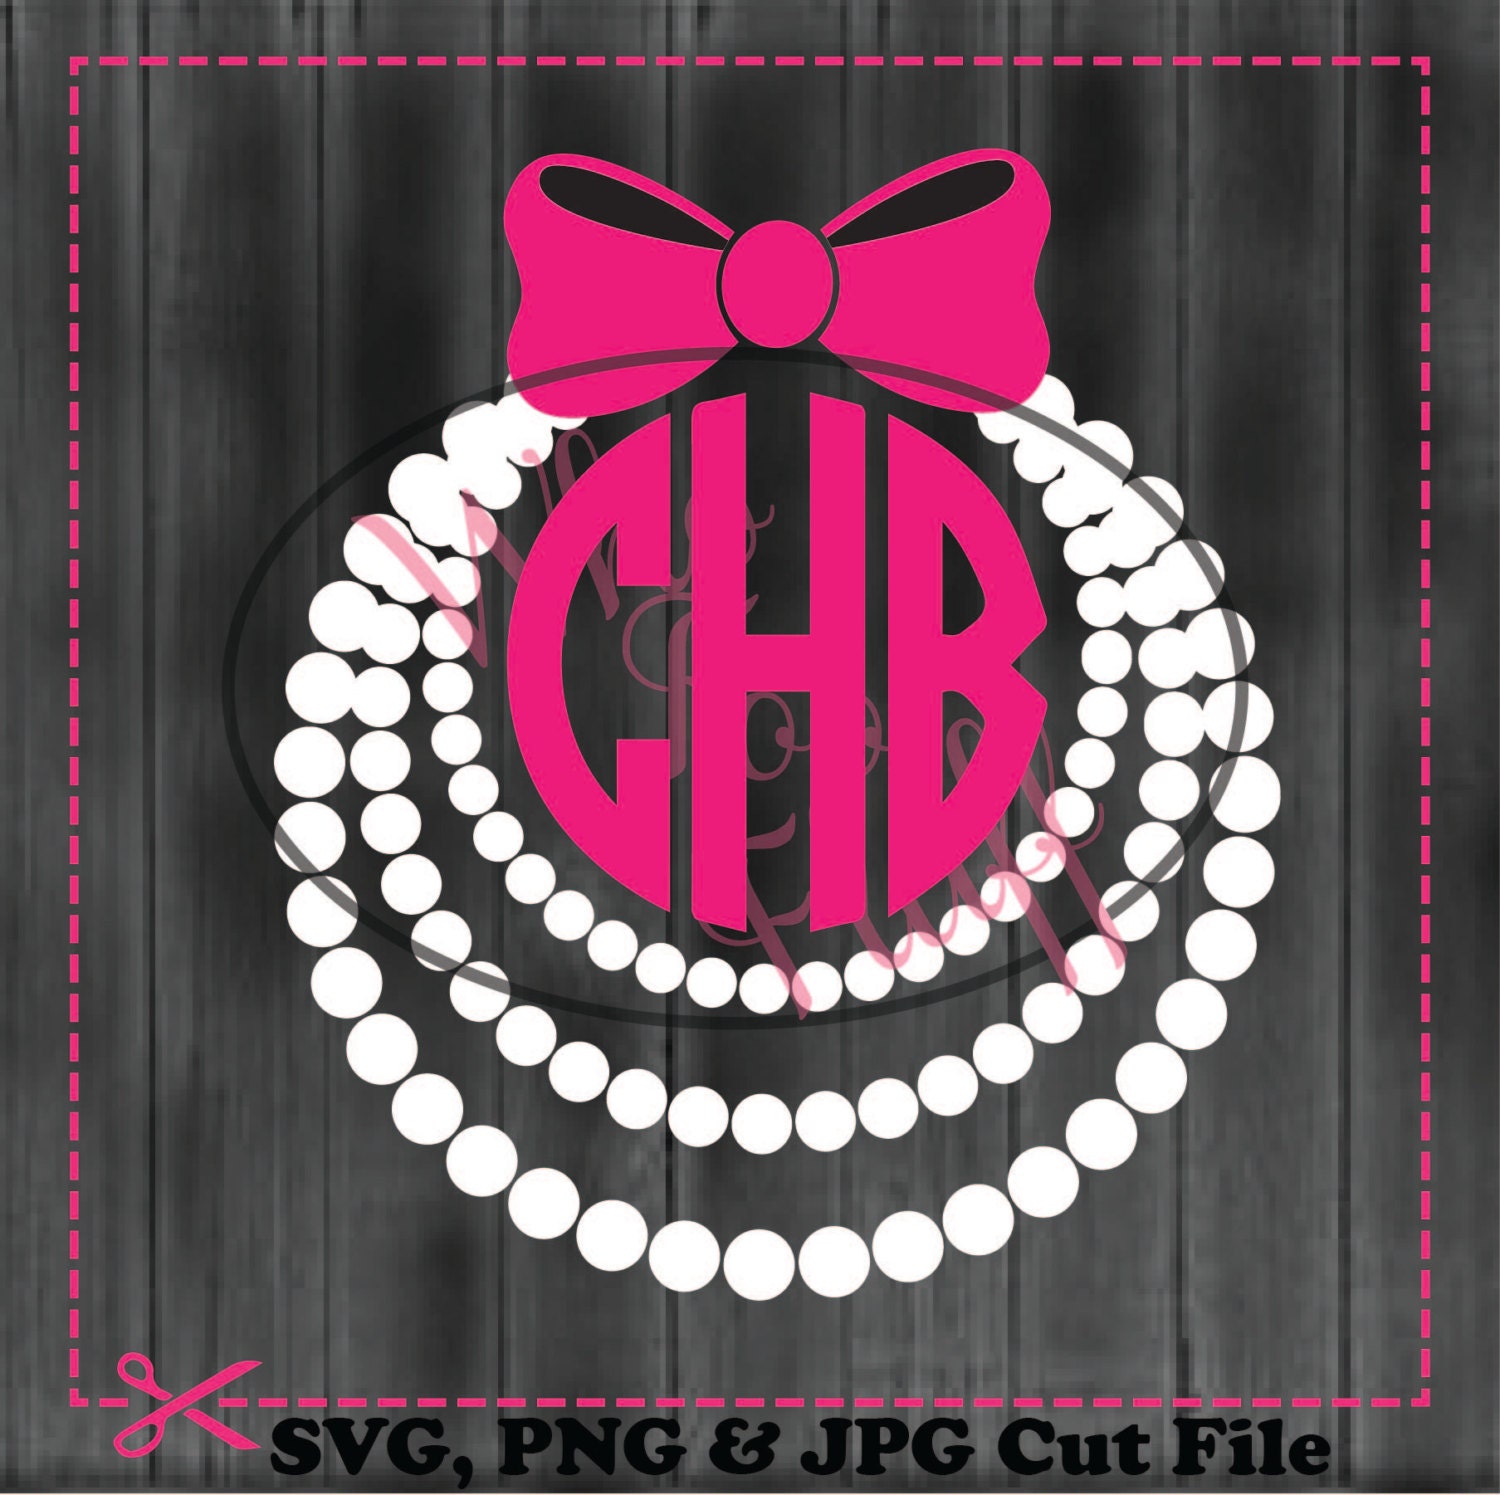 Download Elegant bow and pearls monogram svg png jpg cutting file